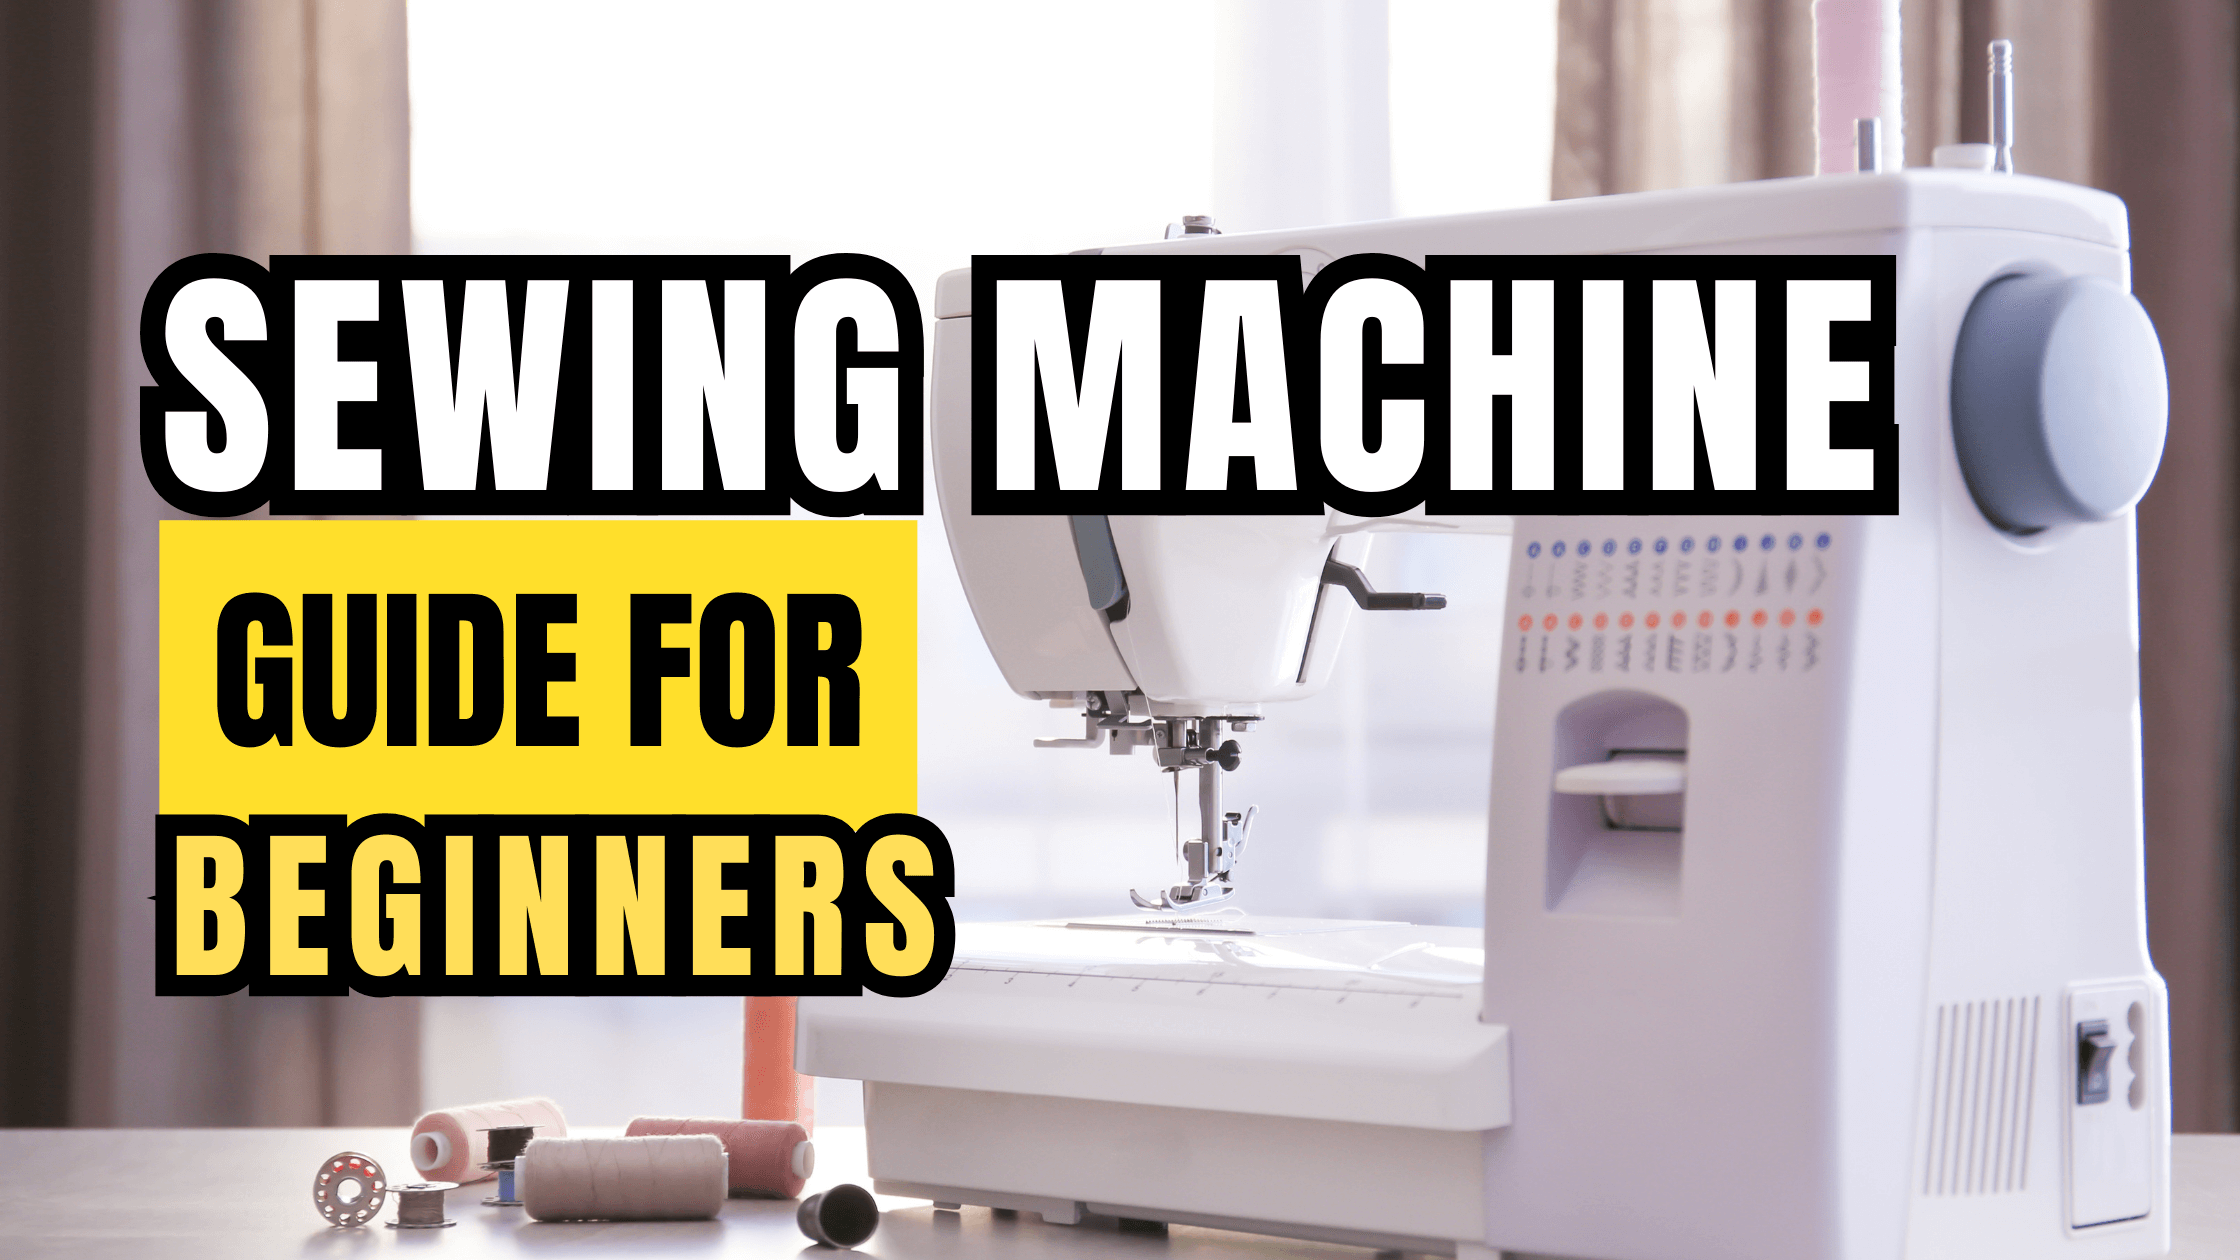 Beginner's guide sewing machine setup illustrating threading, fabric cutting, and basic sewing techniques